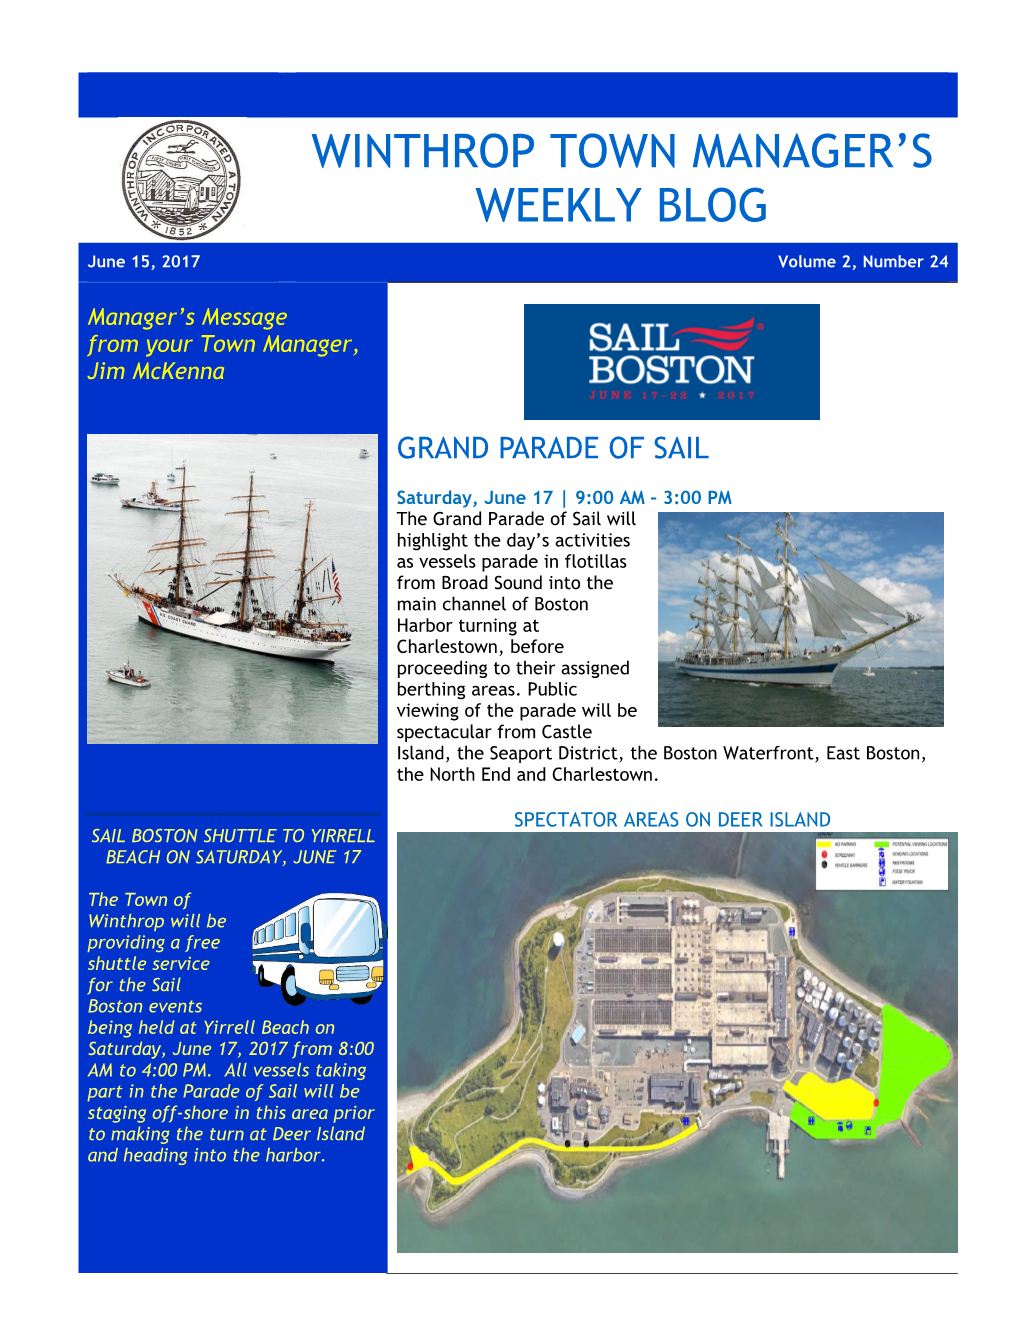 Winthrop Town Manager's Weekly Blog